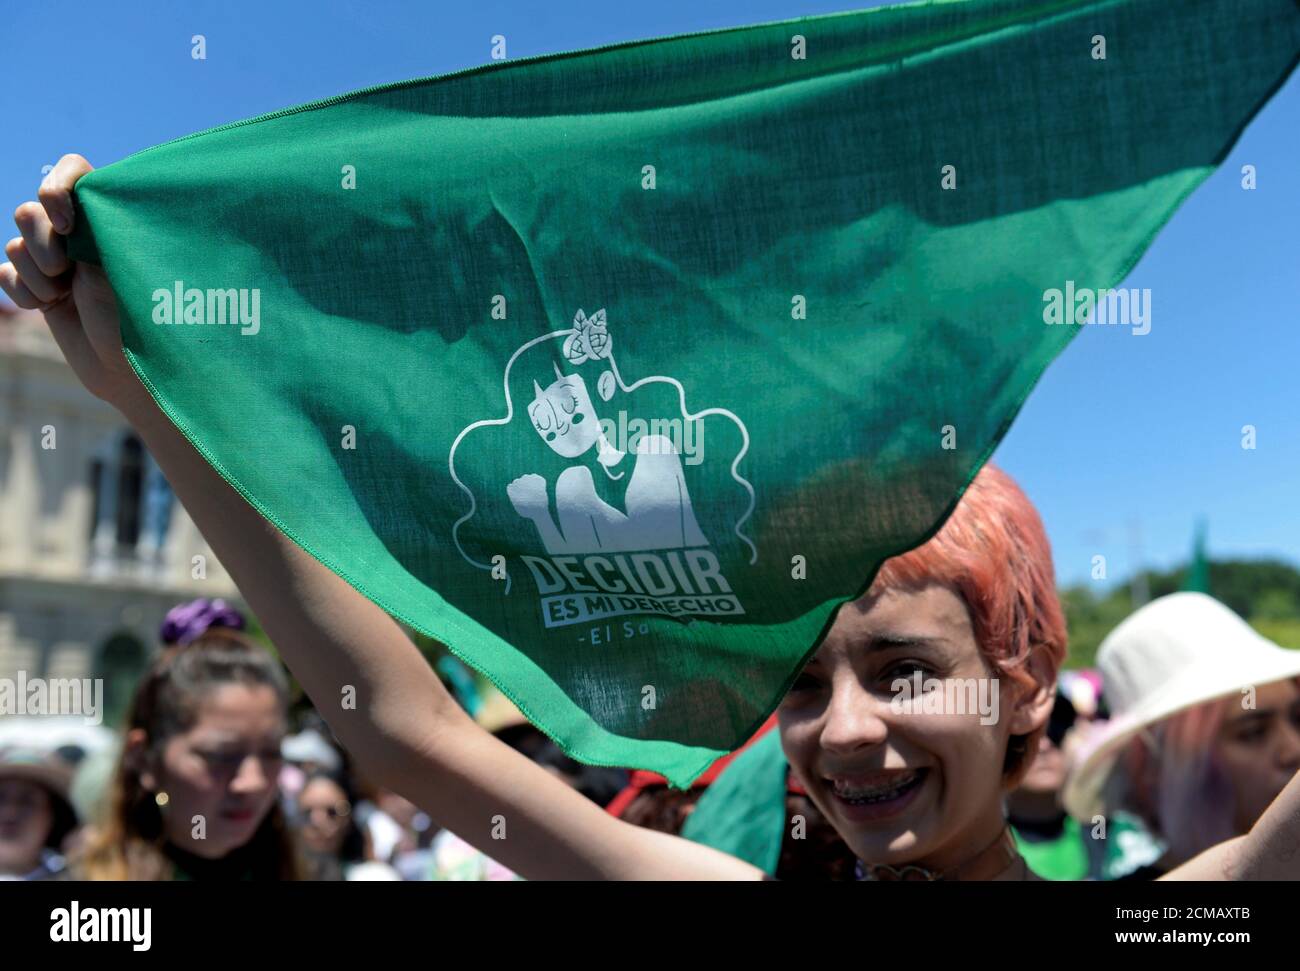 A woman holds up a green handkerchief, symbolizing the abortion rights movement, during a protest to mark International Women's Day in San Salvador, El Salvador March 8, 2020. REUTERS/Jessica Orellana Stock Photo